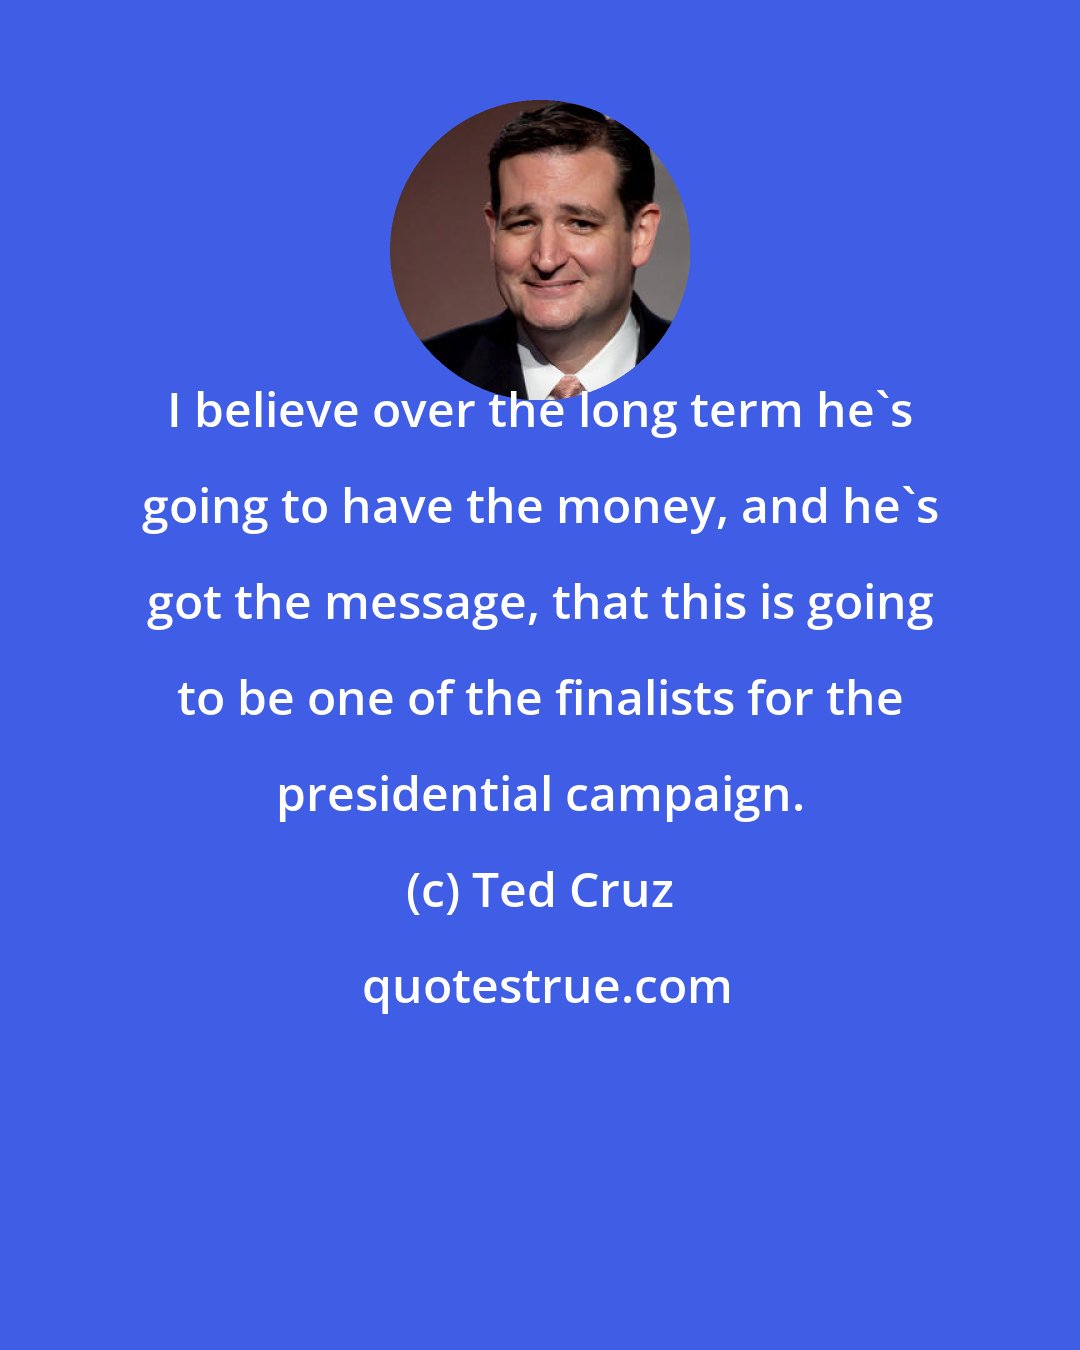 Ted Cruz: I believe over the long term he's going to have the money, and he's got the message, that this is going to be one of the finalists for the presidential campaign.